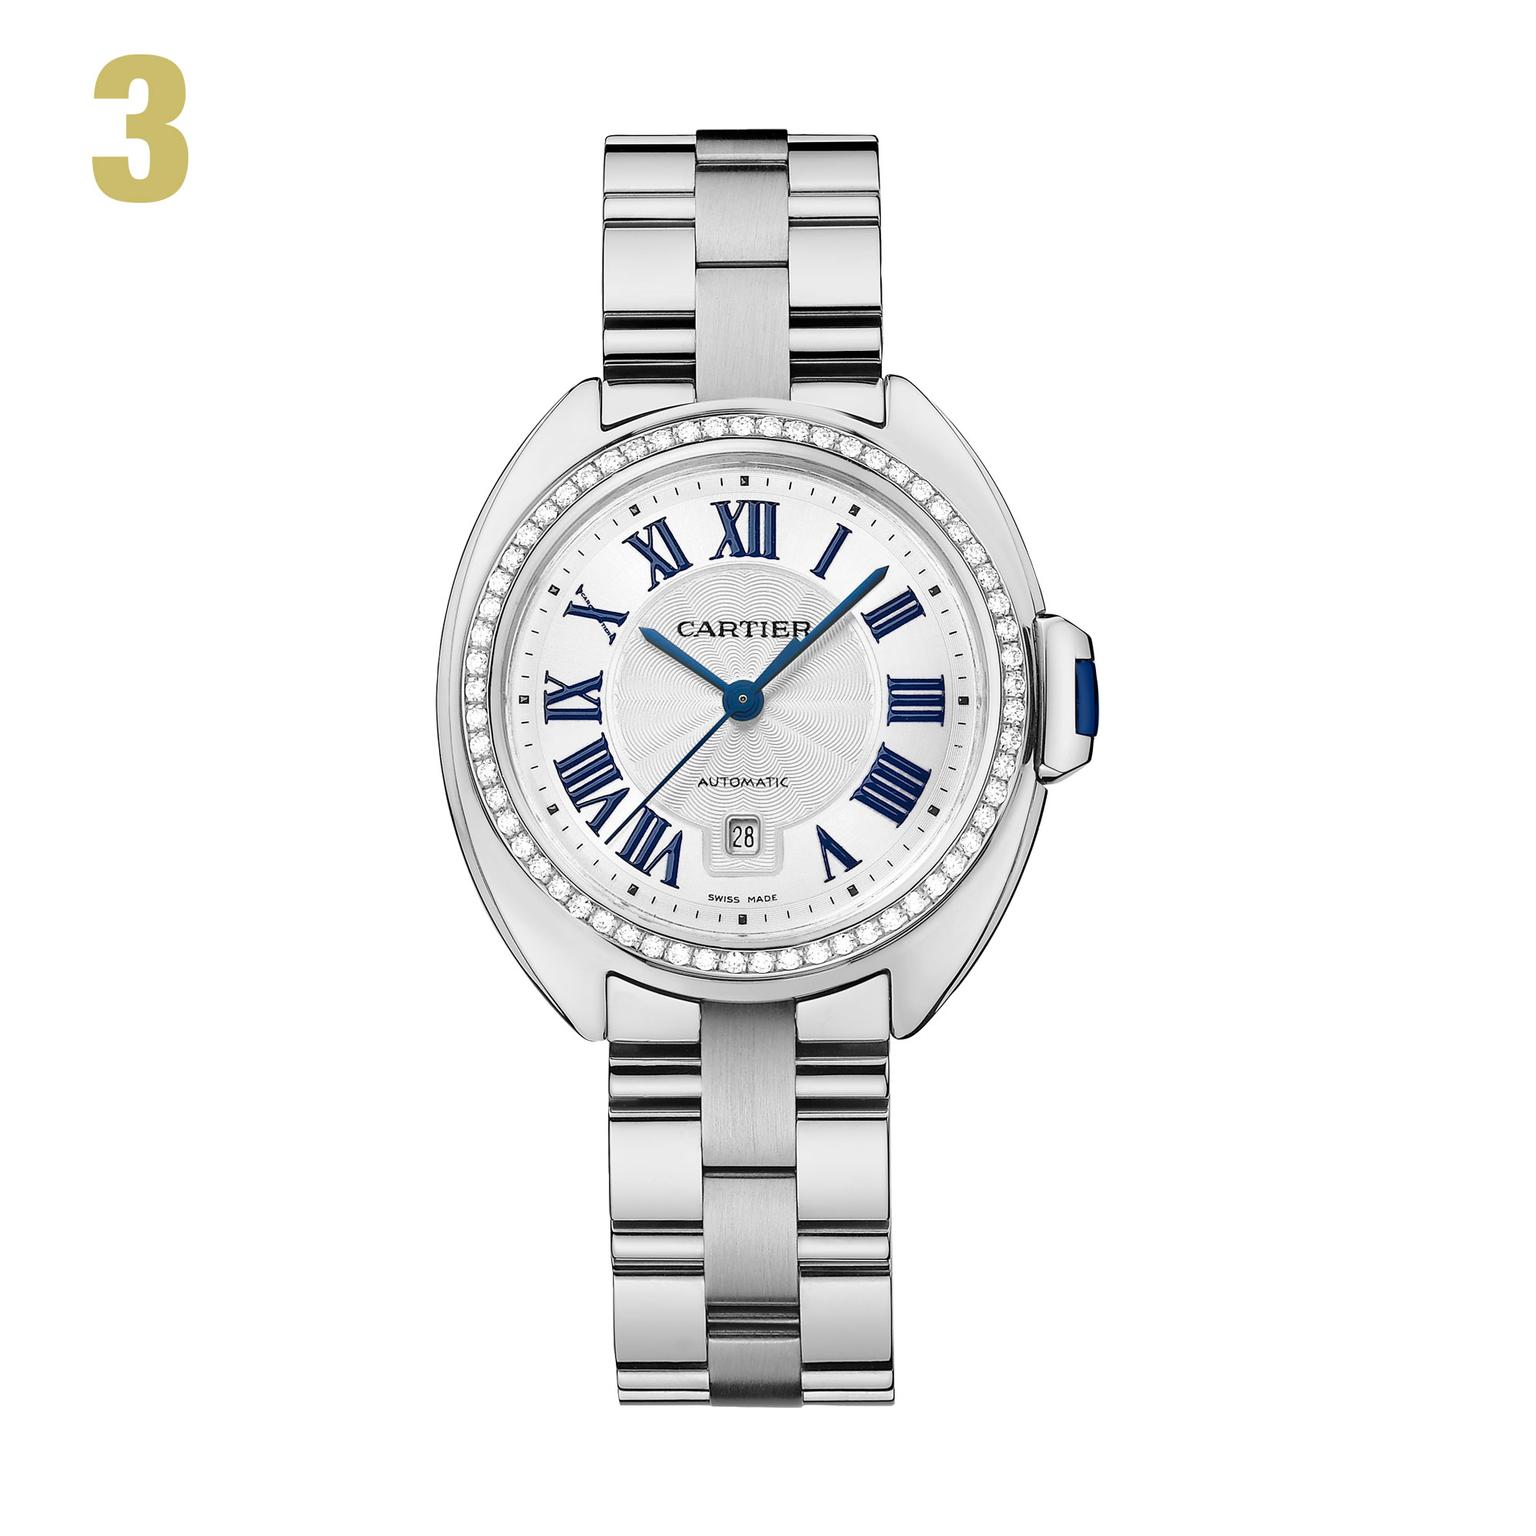 3 Cle de Cartier watch with sapphire cabochon crown and